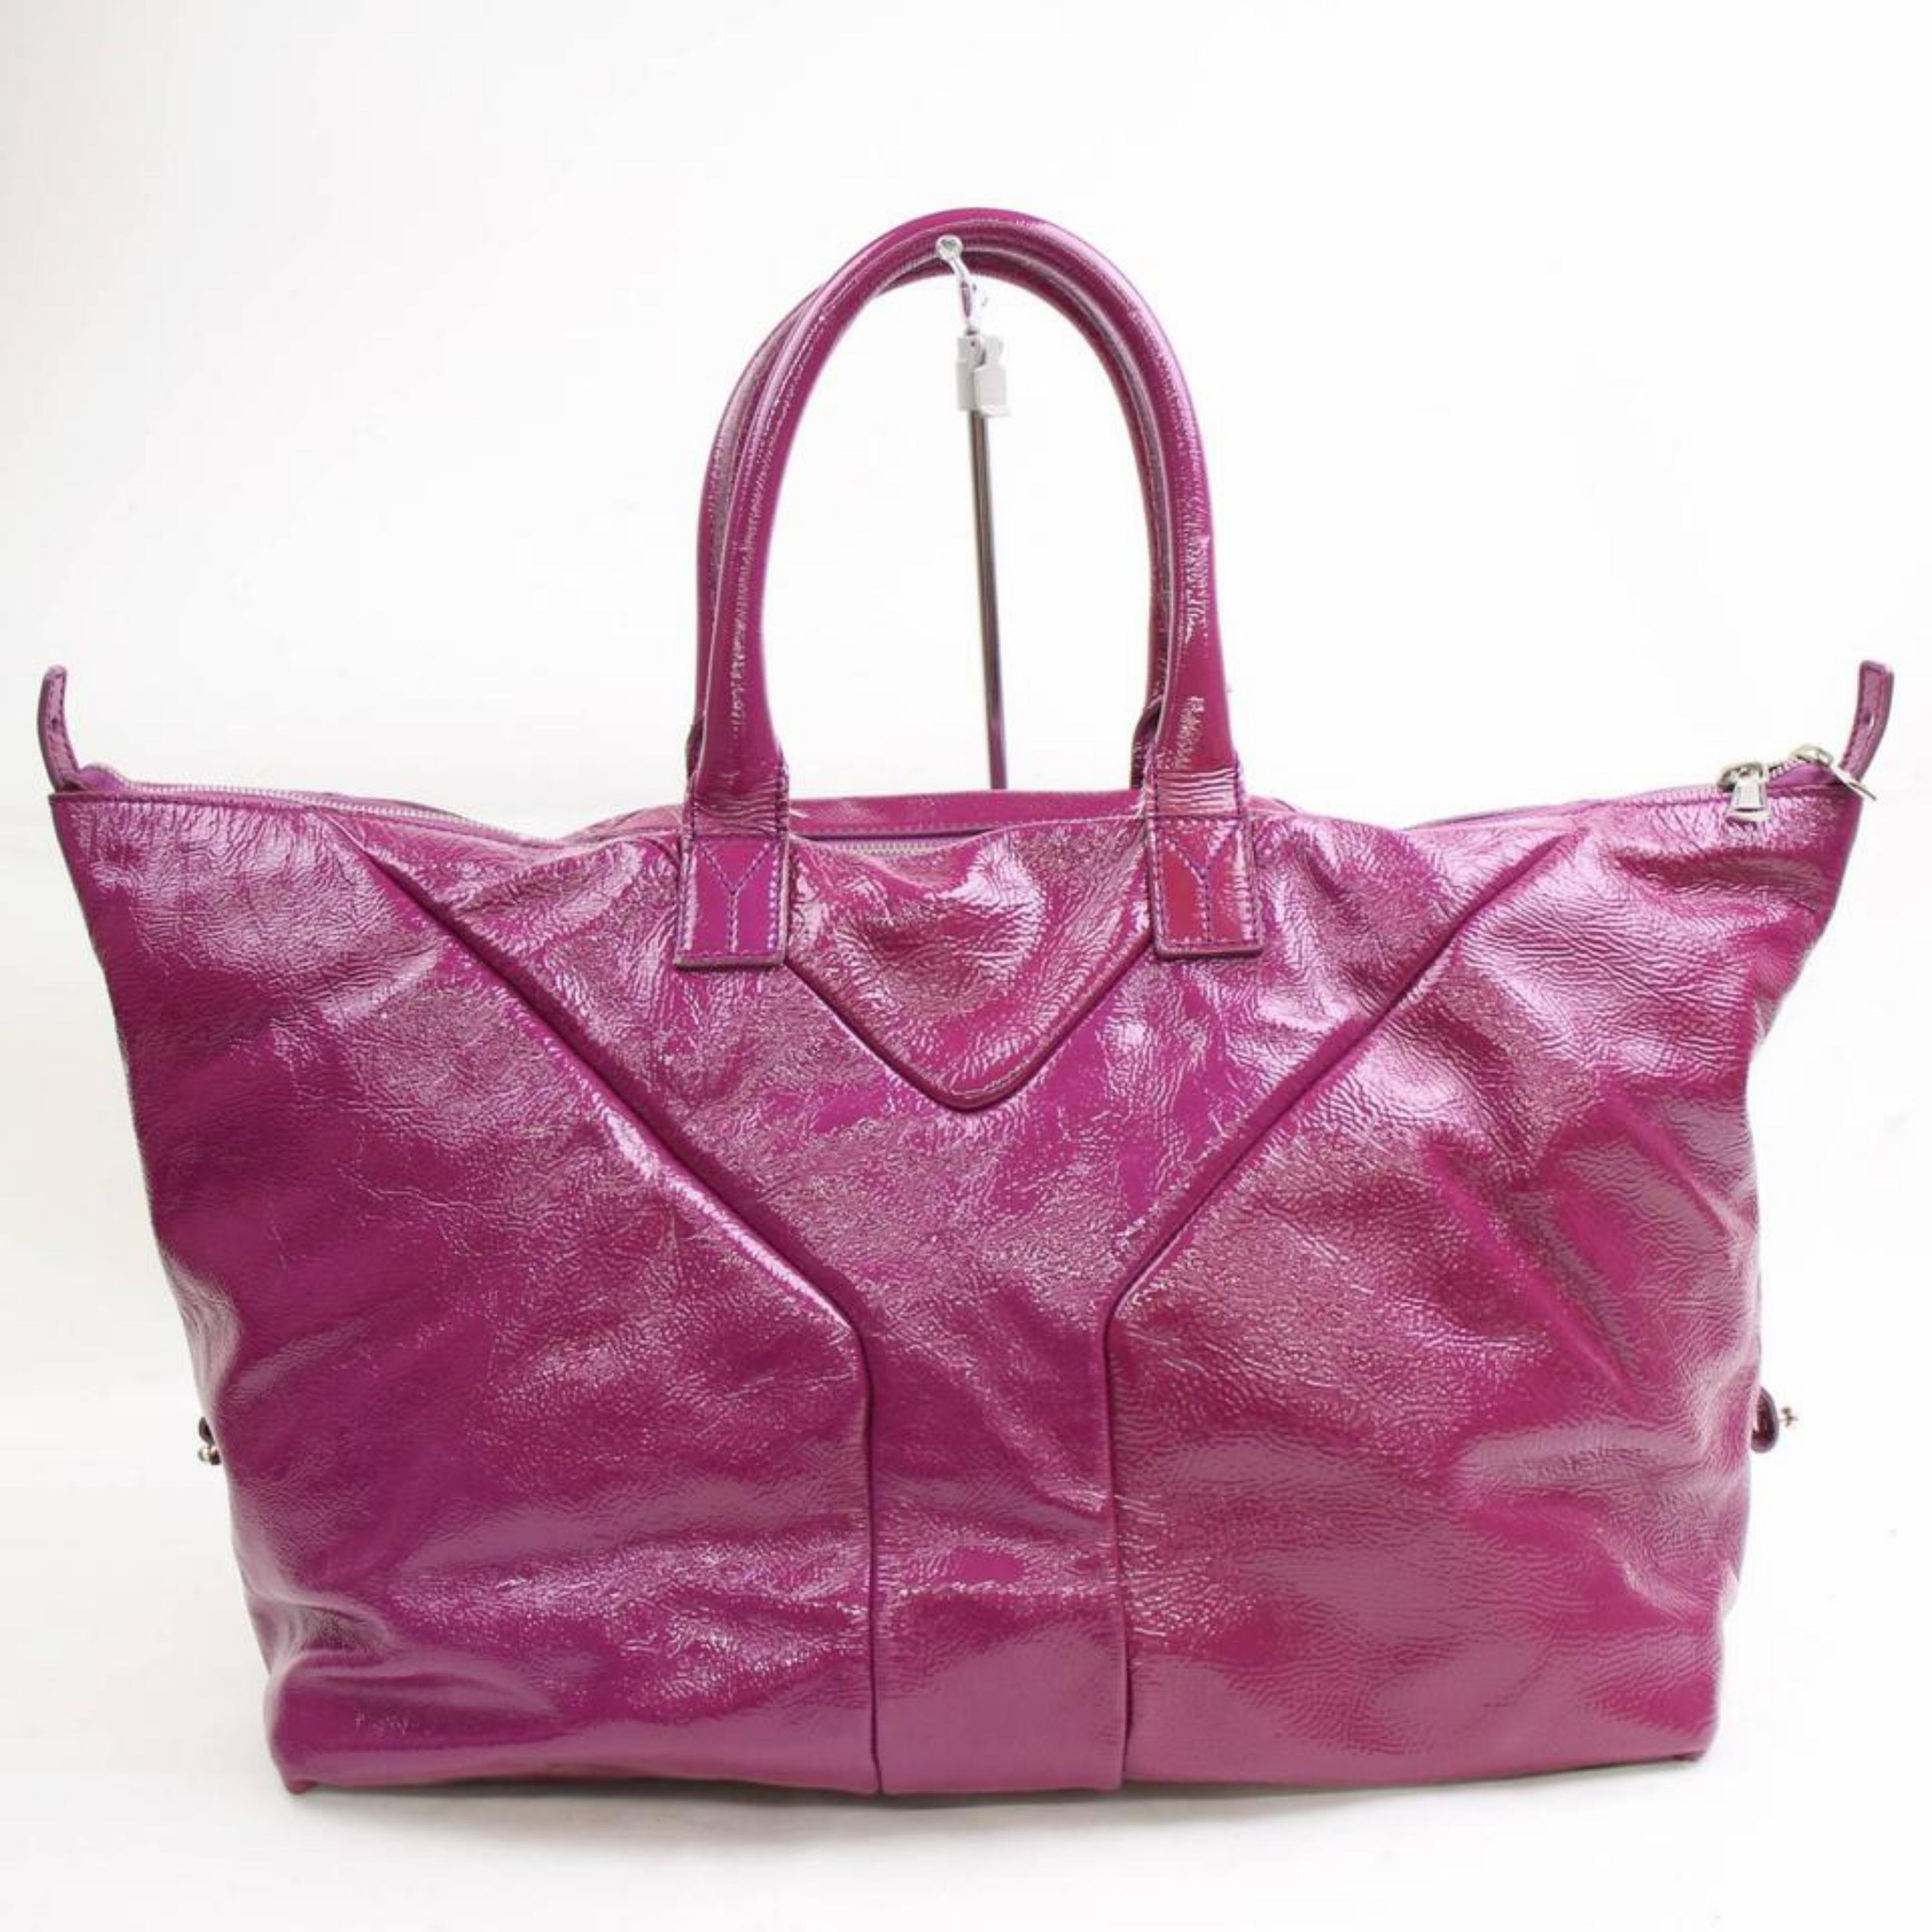 Saint Laurent Easy Extra Large Y Boston Convertrible 868325 Fuchsia Leather Tote In Good Condition For Sale In Forest Hills, NY